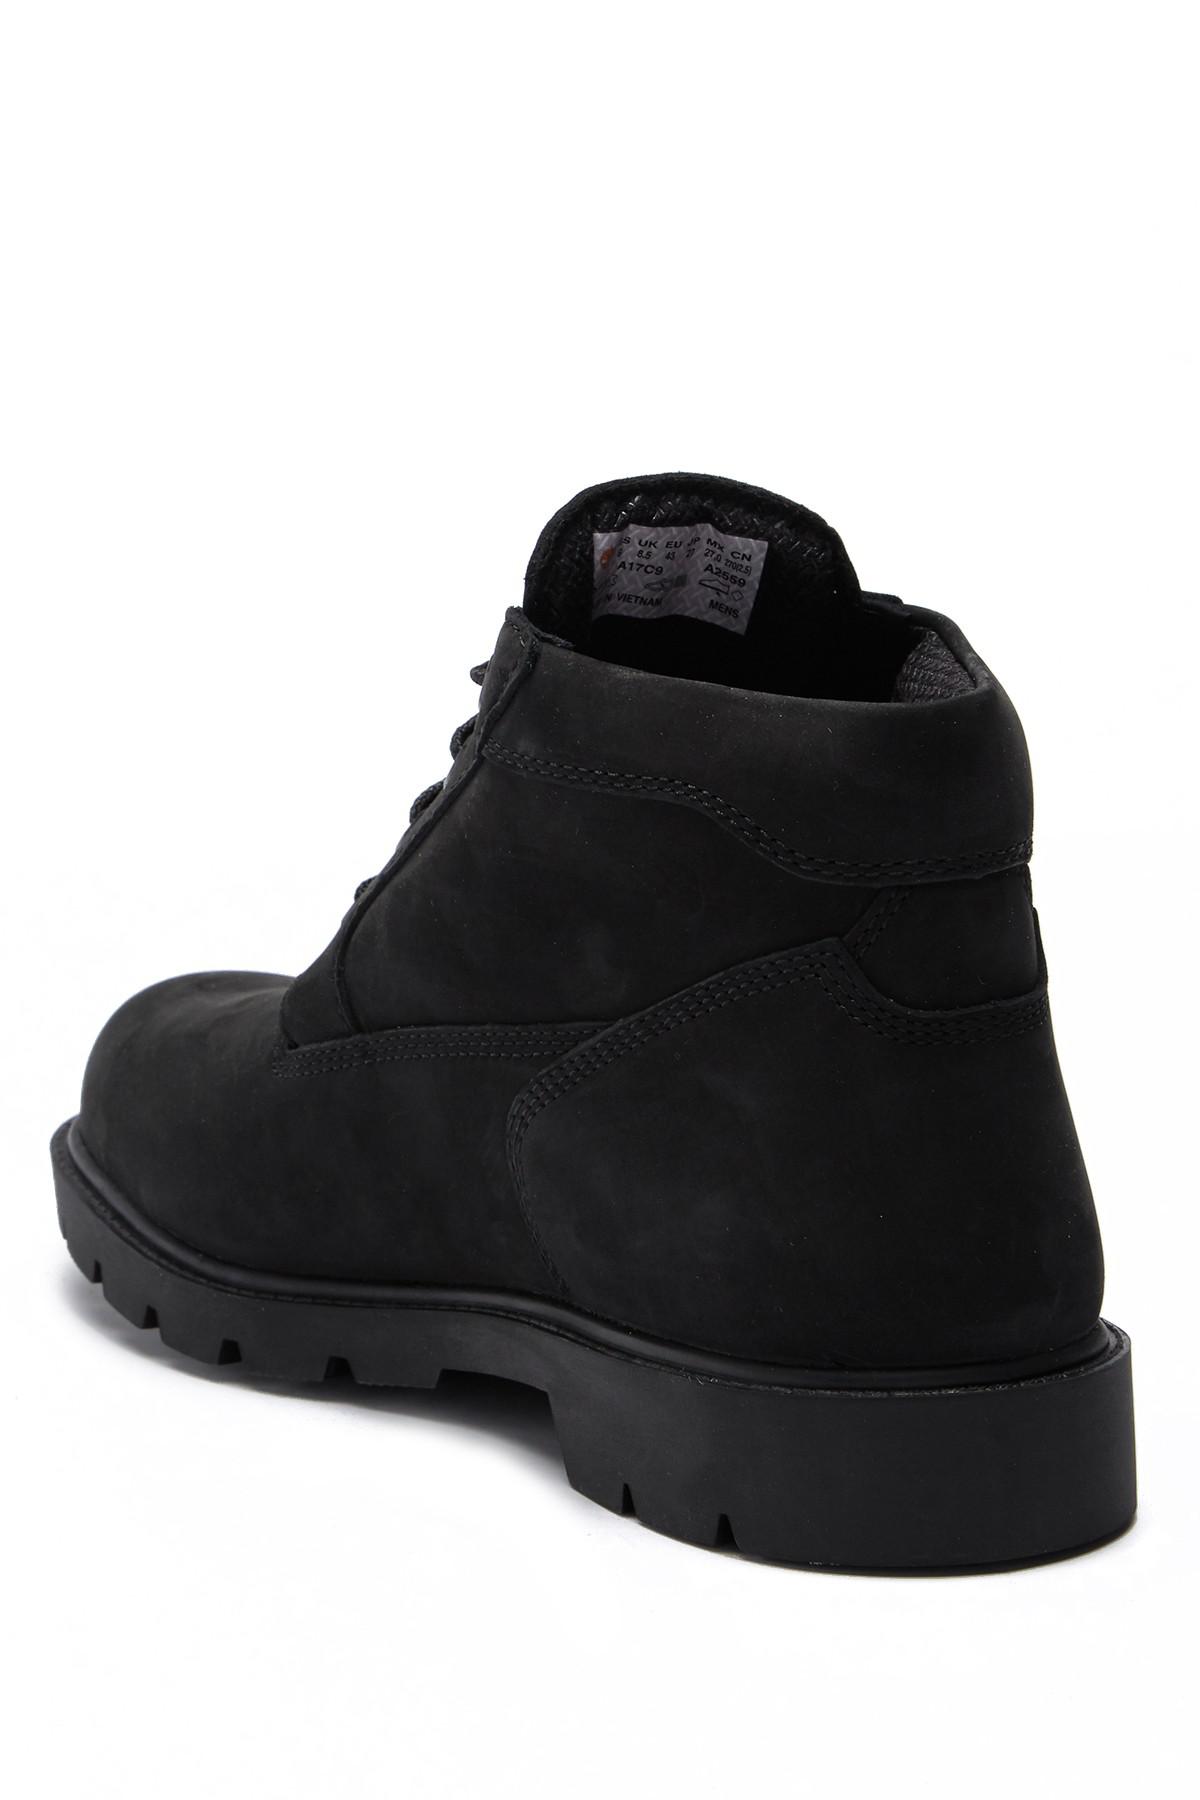 Timberland Value Suede Chukka Boot - Wide Width Available in Black for Men  - Lyst